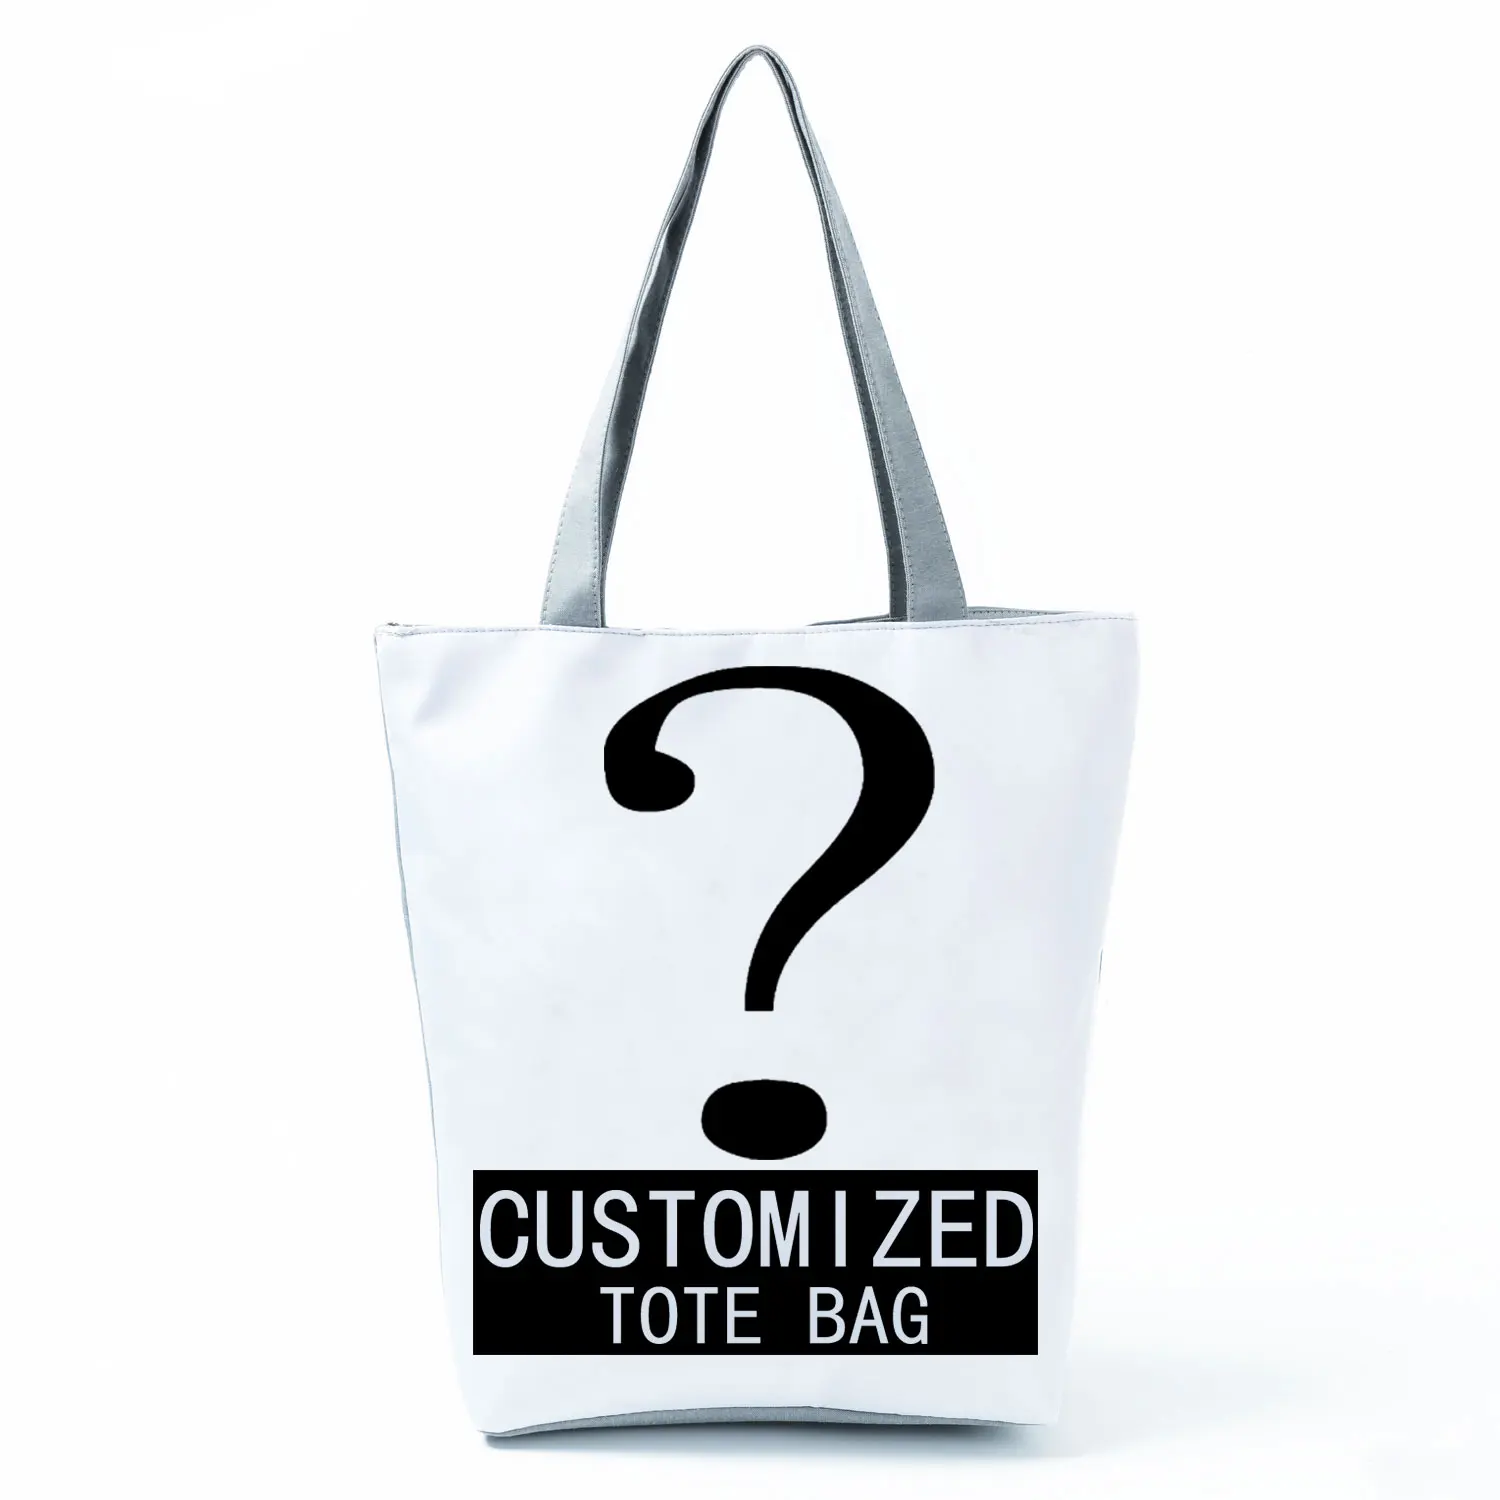 Personal Customize Women Tote Bag With Print Logo Custom Your Pictures Shopping Bags DIY Printing Shoulder Bags Foldable Totes